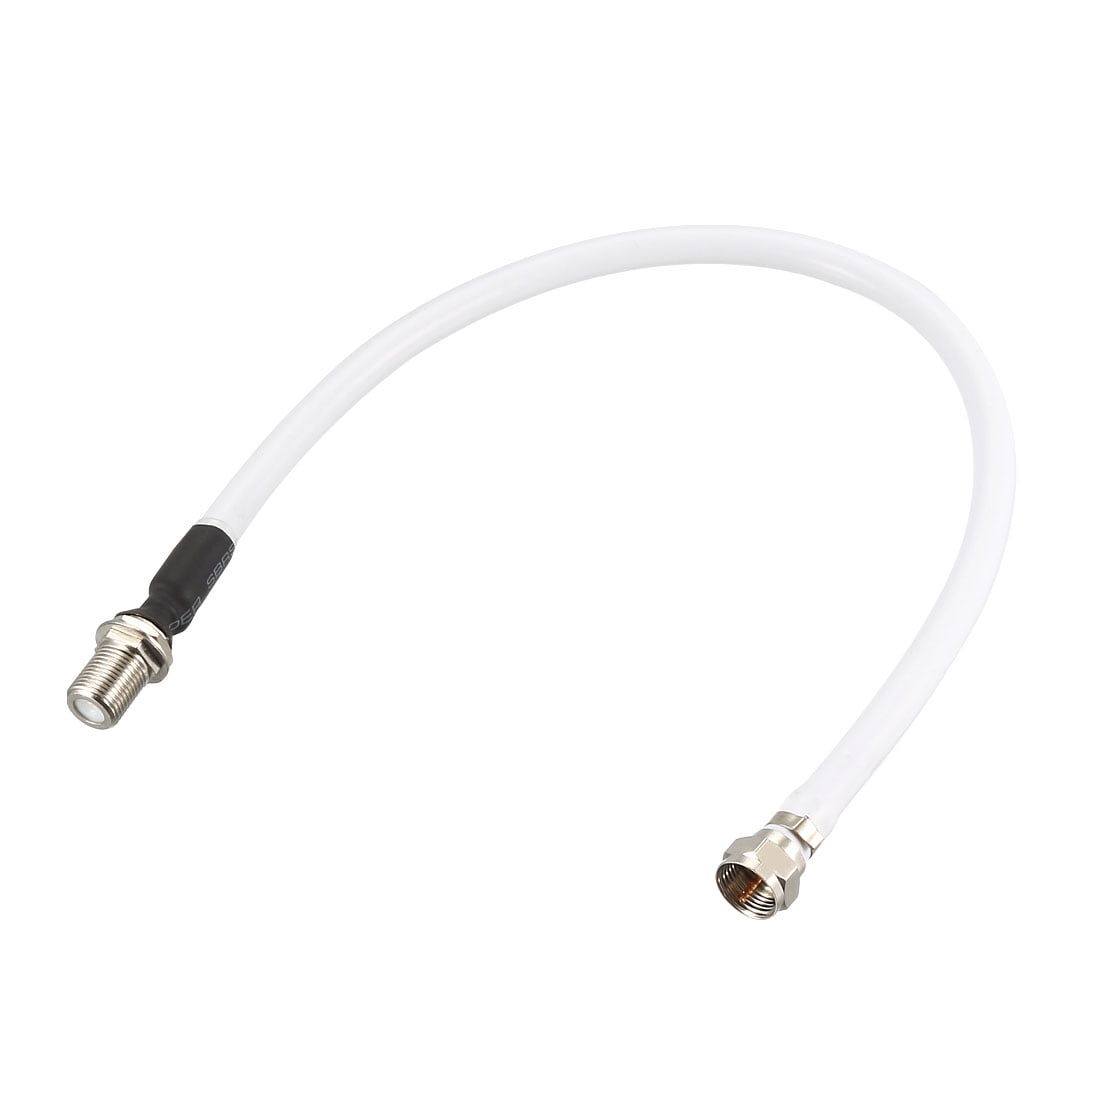 Etokfoks 6 ft. RG6 Shielded Gold Plated Cat 8 Cable Wire - White  MLPH003LT094 - The Home Depot